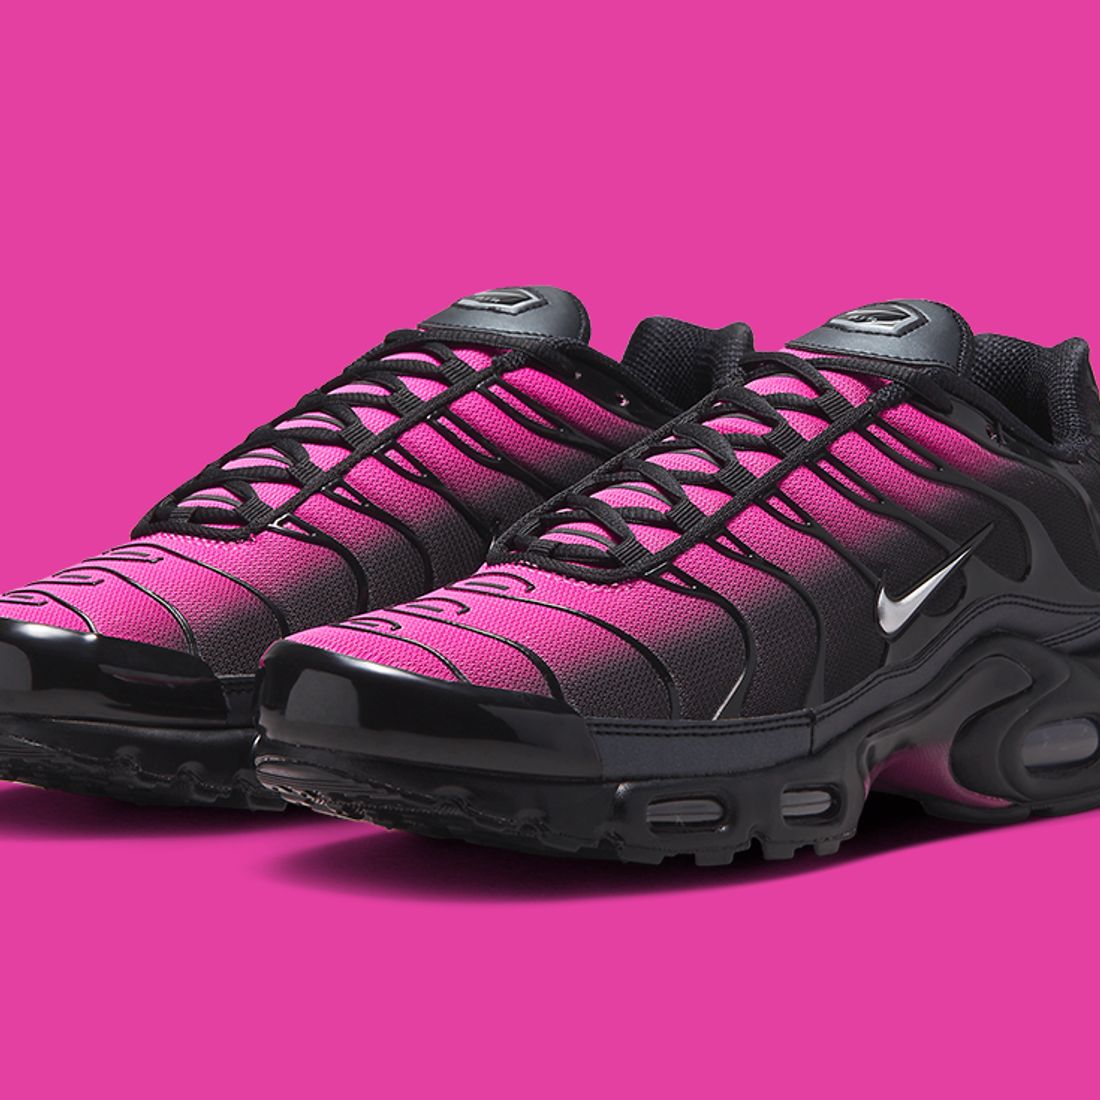 This Gradient Nike Air Max Plus 'Fire Berry' - Freaker